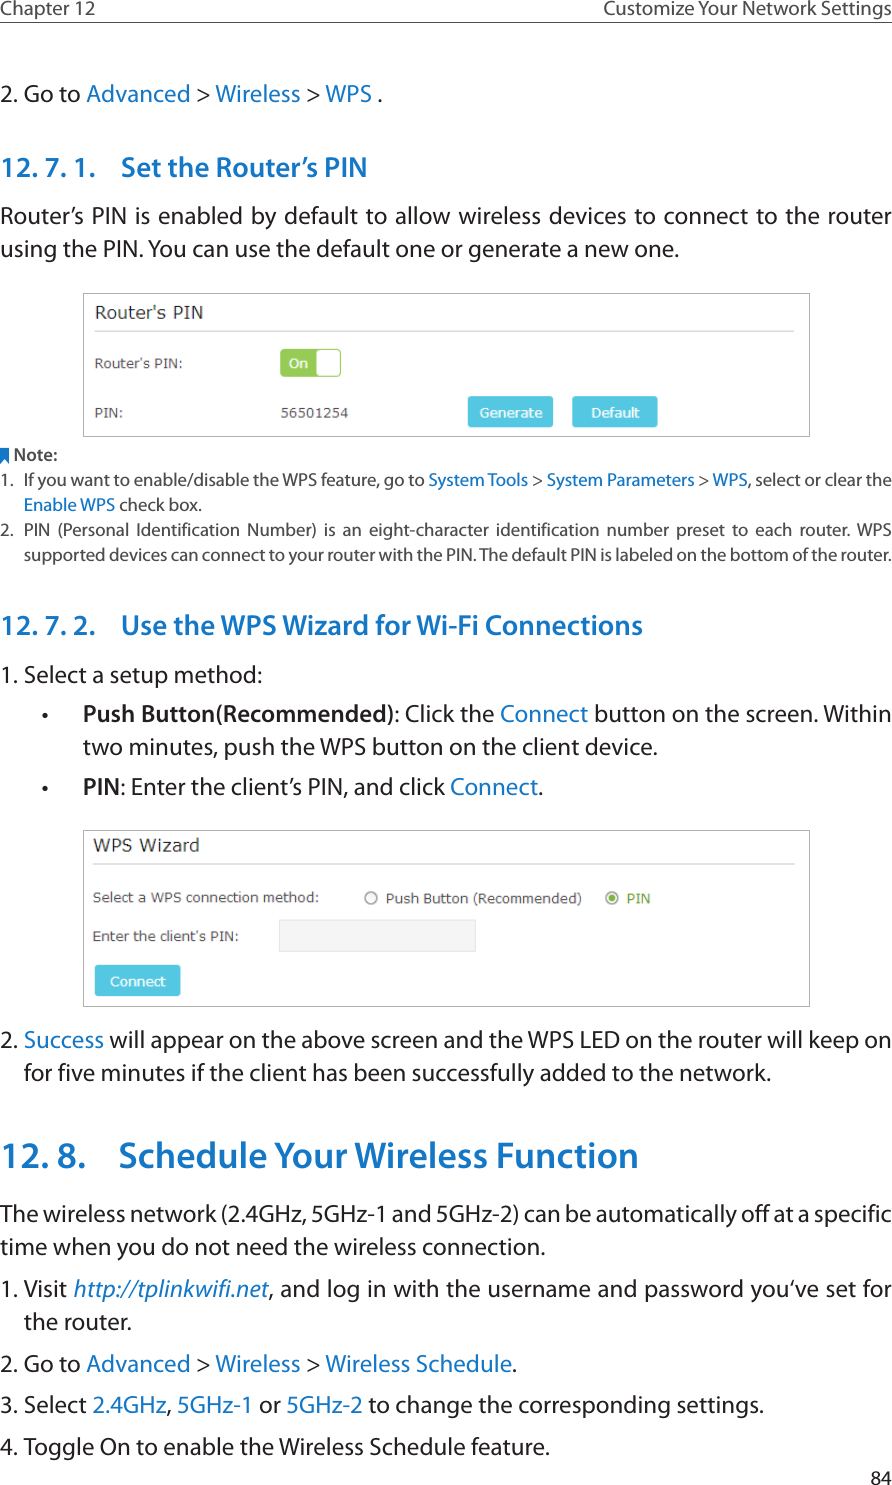 84Chapter 12 Customize Your Network Settings2. Go to Advanced &gt; Wireless &gt; WPS .12. 7. 1.  Set the Router’s PINRouter’s PIN is enabled by default to allow wireless devices to connect to the router using the PIN. You can use the default one or generate a new one.Note:1.  If you want to enable/disable the WPS feature, go to System Tools &gt; System Parameters &gt; WPS, select or clear the Enable WPS check box.2.  PIN (Personal Identification Number) is an eight-character identification number preset to each router. WPS supported devices can connect to your router with the PIN. The default PIN is labeled on the bottom of the router.12. 7. 2.  Use the WPS Wizard for Wi-Fi Connections1. Select a setup method: •  Push Button(Recommended): Click the Connect button on the screen. Within two minutes, push the WPS button on the client device.•  PIN: Enter the client’s PIN, and click Connect.2. Success will appear on the above screen and the WPS LED on the router will keep on for five minutes if the client has been successfully added to the network.12. 8.  Schedule Your Wireless FunctionThe wireless network (2.4GHz, 5GHz-1 and 5GHz-2) can be automatically off at a specific time when you do not need the wireless connection.1. Visit http://tplinkwifi.net, and log in with the username and password you‘ve set for the router.2. Go to Advanced &gt; Wireless &gt; Wireless Schedule.3. Select 2.4GHz, 5GHz-1 or 5GHz-2 to change the corresponding settings.4. Toggle On to enable the Wireless Schedule feature.